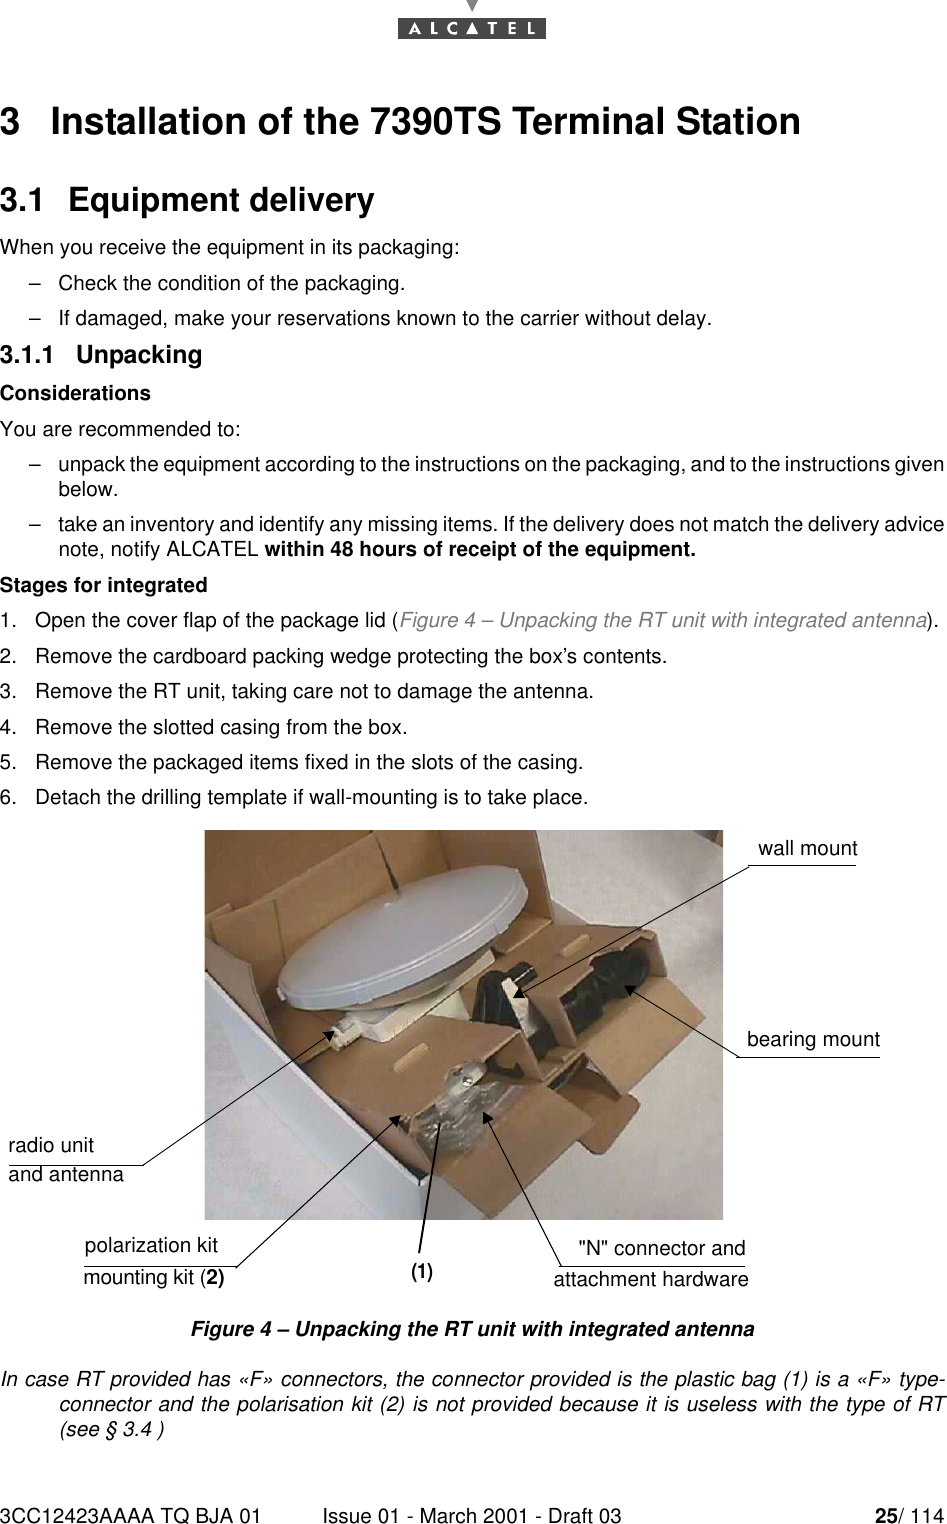 3CC12423AAAA TQ BJA 01 Issue 01 - March 2001 - Draft 03 25/ 114523   Installation of the 7390TS Terminal Station3.1  Equipment deliveryWhen you receive the equipment in its packaging:–Check the condition of the packaging.–If damaged, make your reservations known to the carrier without delay.3.1.1   UnpackingConsiderationsYou are recommended to:–unpack the equipment according to the instructions on the packaging, and to the instructions givenbelow.–take an inventory and identify any missing items. If the delivery does not match the delivery advicenote, notify ALCATEL within 48 hours of receipt of the equipment.Stages for integrated1. Open the cover flap of the package lid (Figure 4 – Unpacking the RT unit with integrated antenna).2. Remove the cardboard packing wedge protecting the box’s contents.3. Remove the RT unit, taking care not to damage the antenna.4. Remove the slotted casing from the box.5. Remove the packaged items fixed in the slots of the casing.6. Detach the drilling template if wall-mounting is to take place.Figure 4 – Unpacking the RT unit with integrated antennaIn case RT provided has «F» connectors, the connector provided is the plastic bag (1) is a «F» type-connector and the polarisation kit (2) is not provided because it is useless with the type of RT(see § 3.4 )radio unit and antennawall mountbearing mountpolarization kit mounting kit (2)&quot;N&quot; connector and attachment hardware(1)